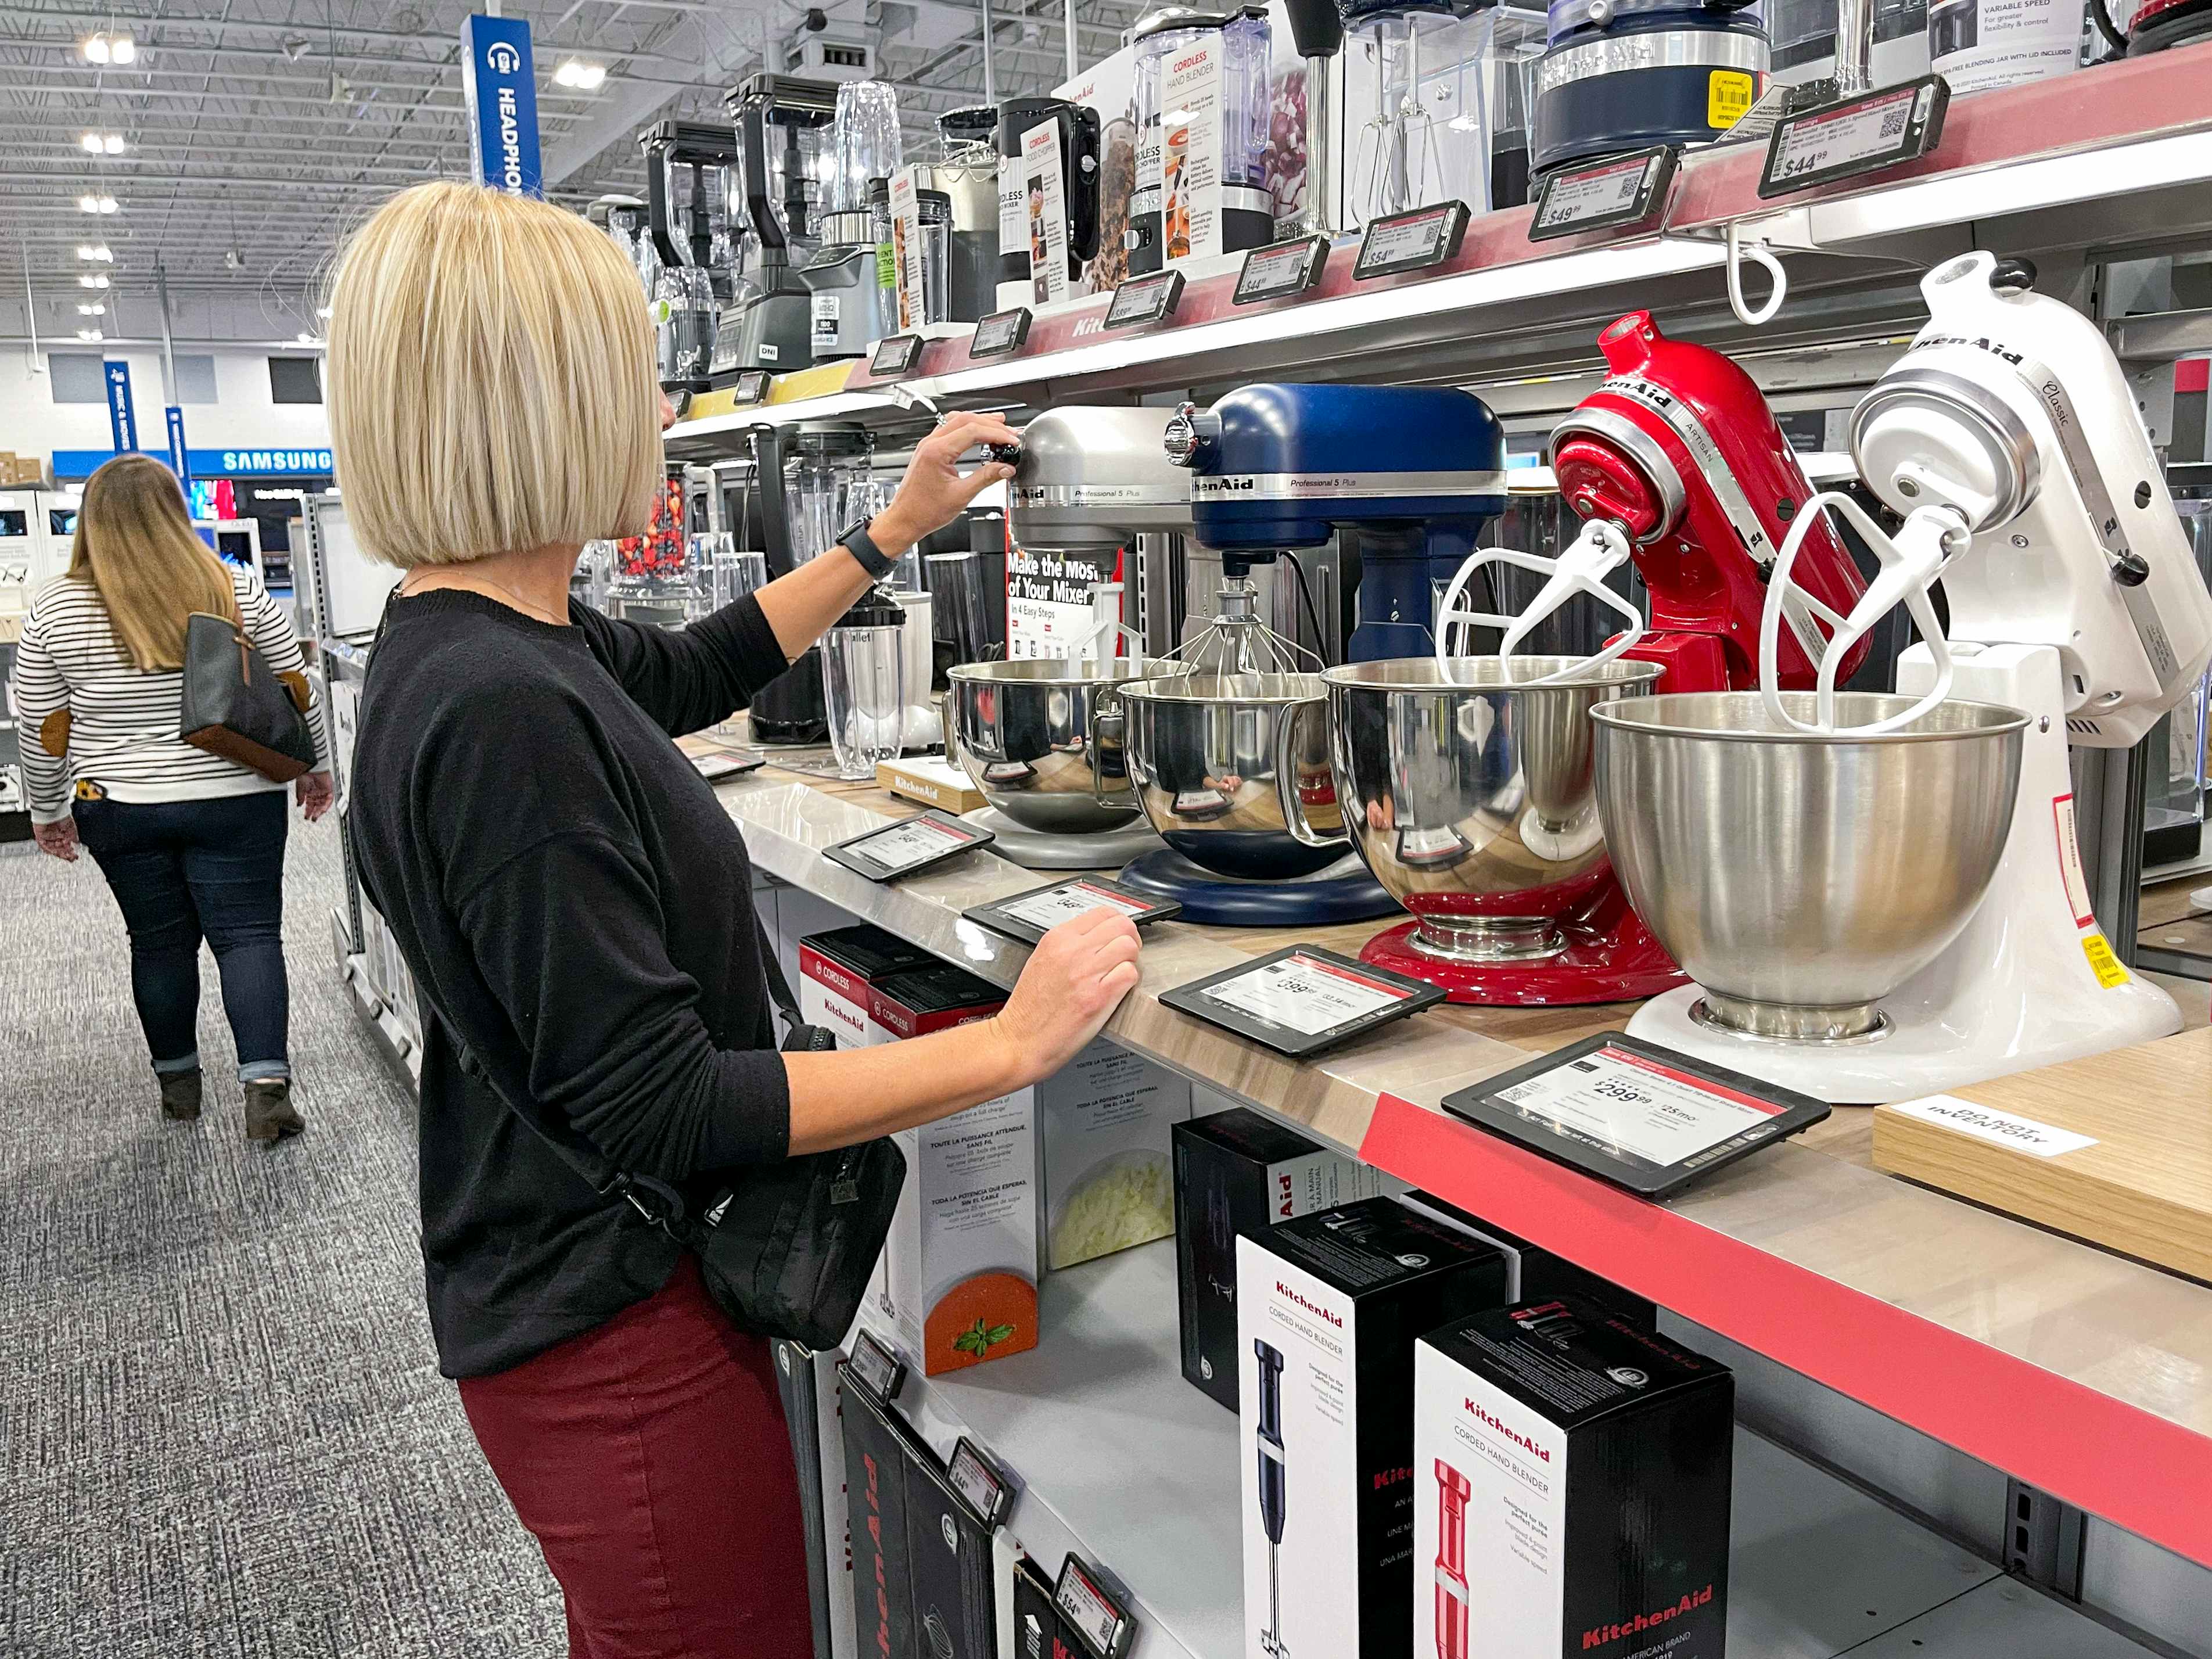 KitchenAid mixer attachments can replace almost any kitchen appliance